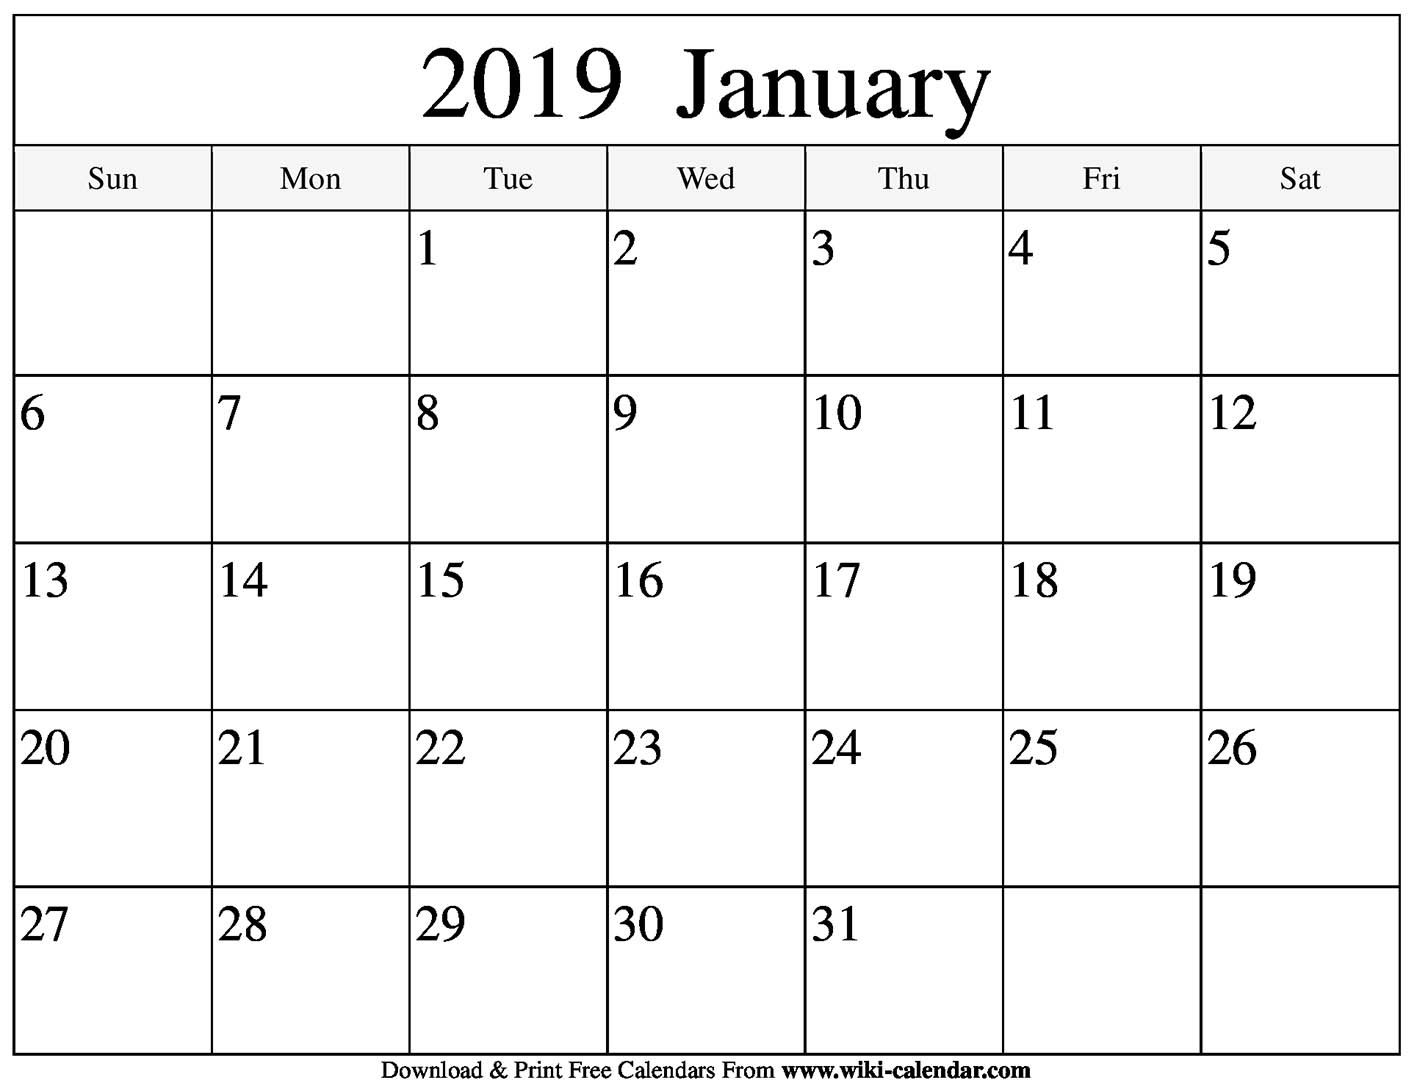 january-2019-calendar-templates-for-word-excel-and-pdf